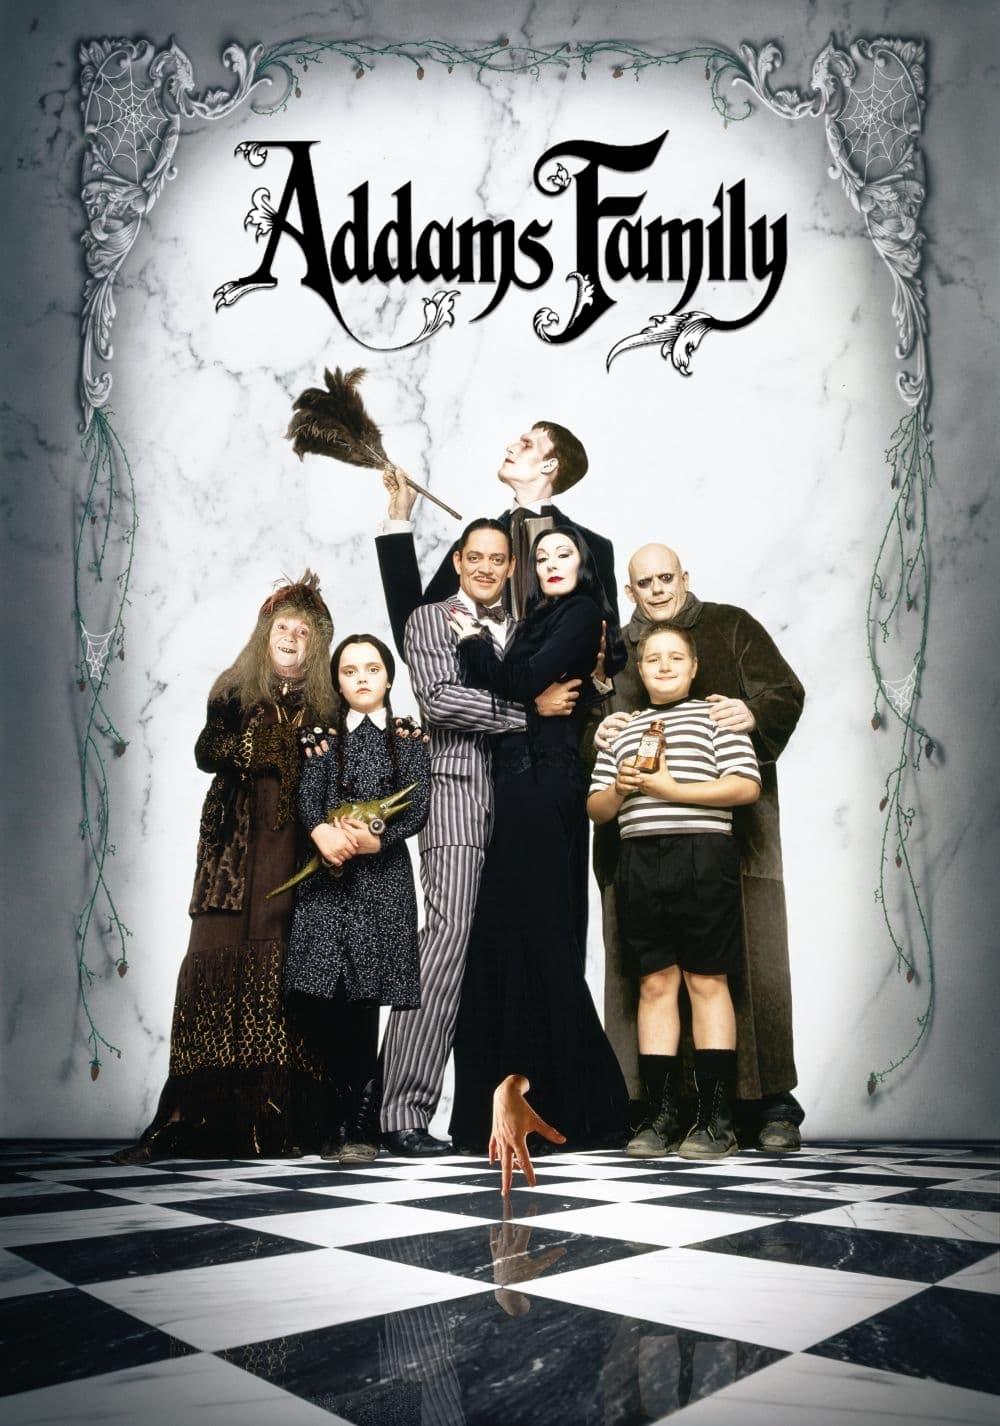 Die Addams Family poster